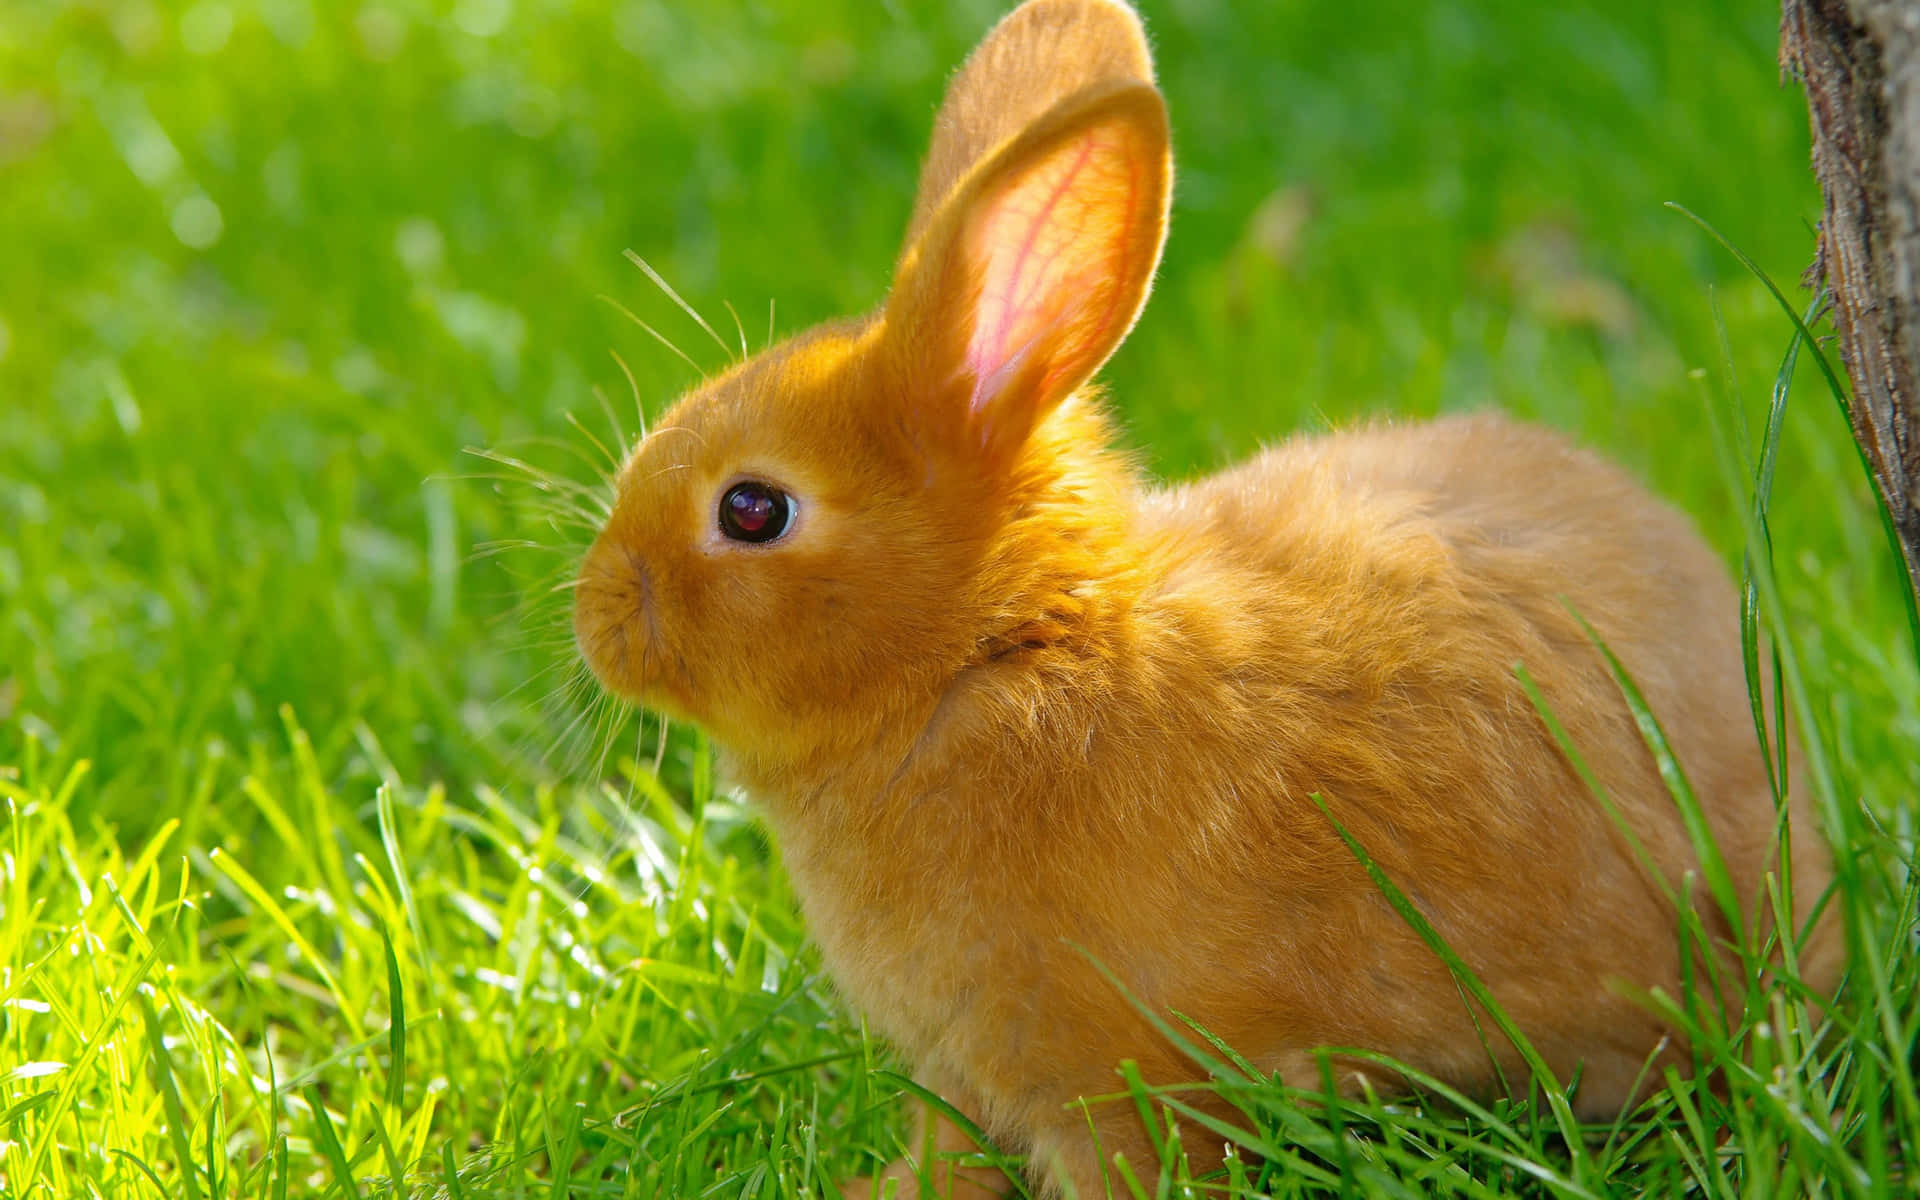 A little white rabbit standing on green grass against a bright blue sky